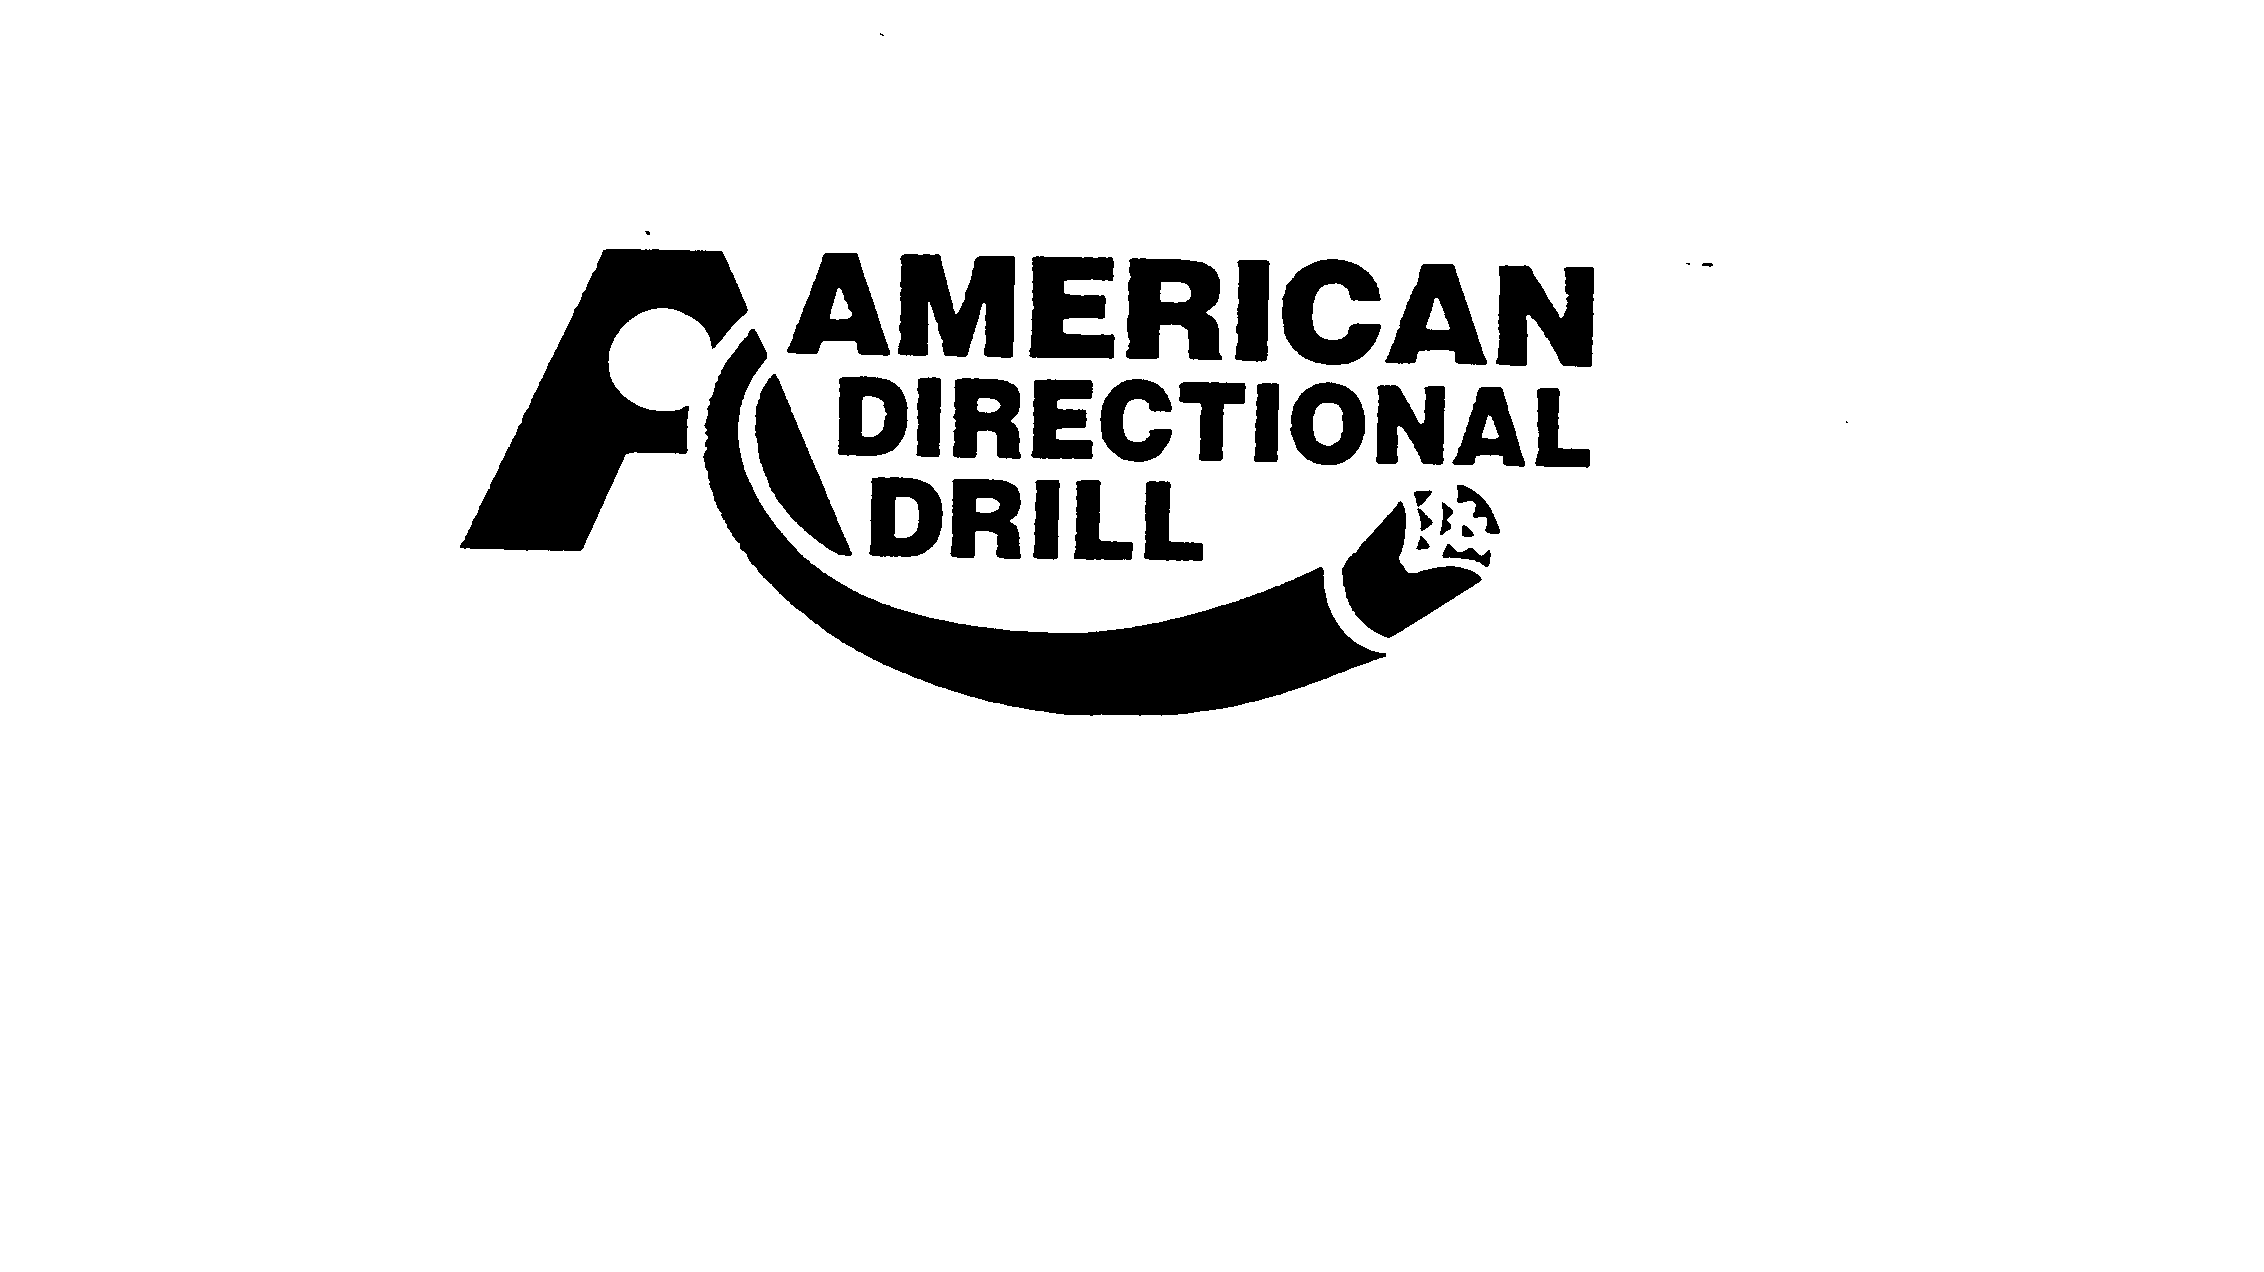 AMERICAN DIRECTIONAL DRILL